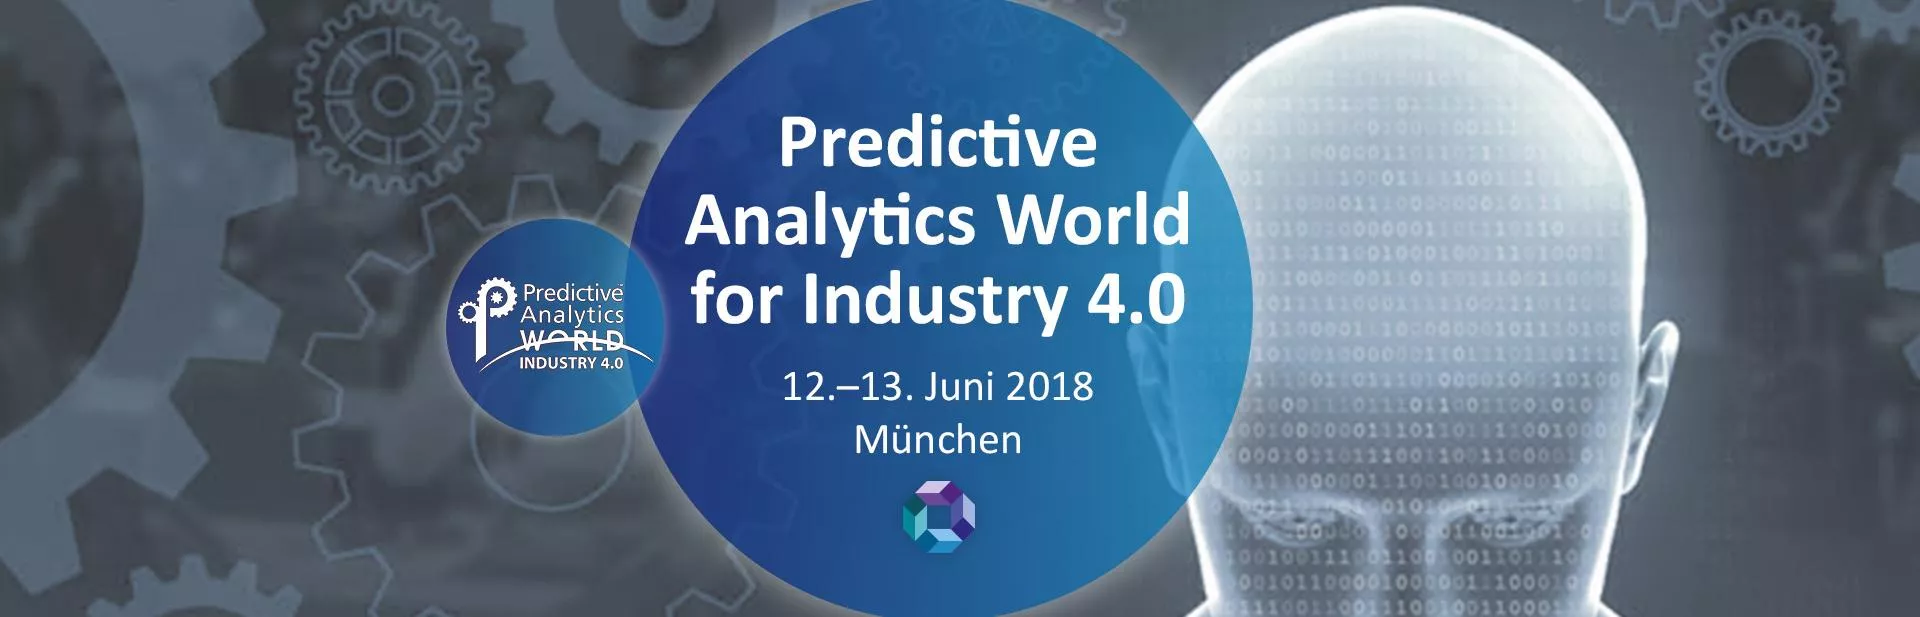 Predictive Analytics World for Industry 4.0 – Where AI meets IoT